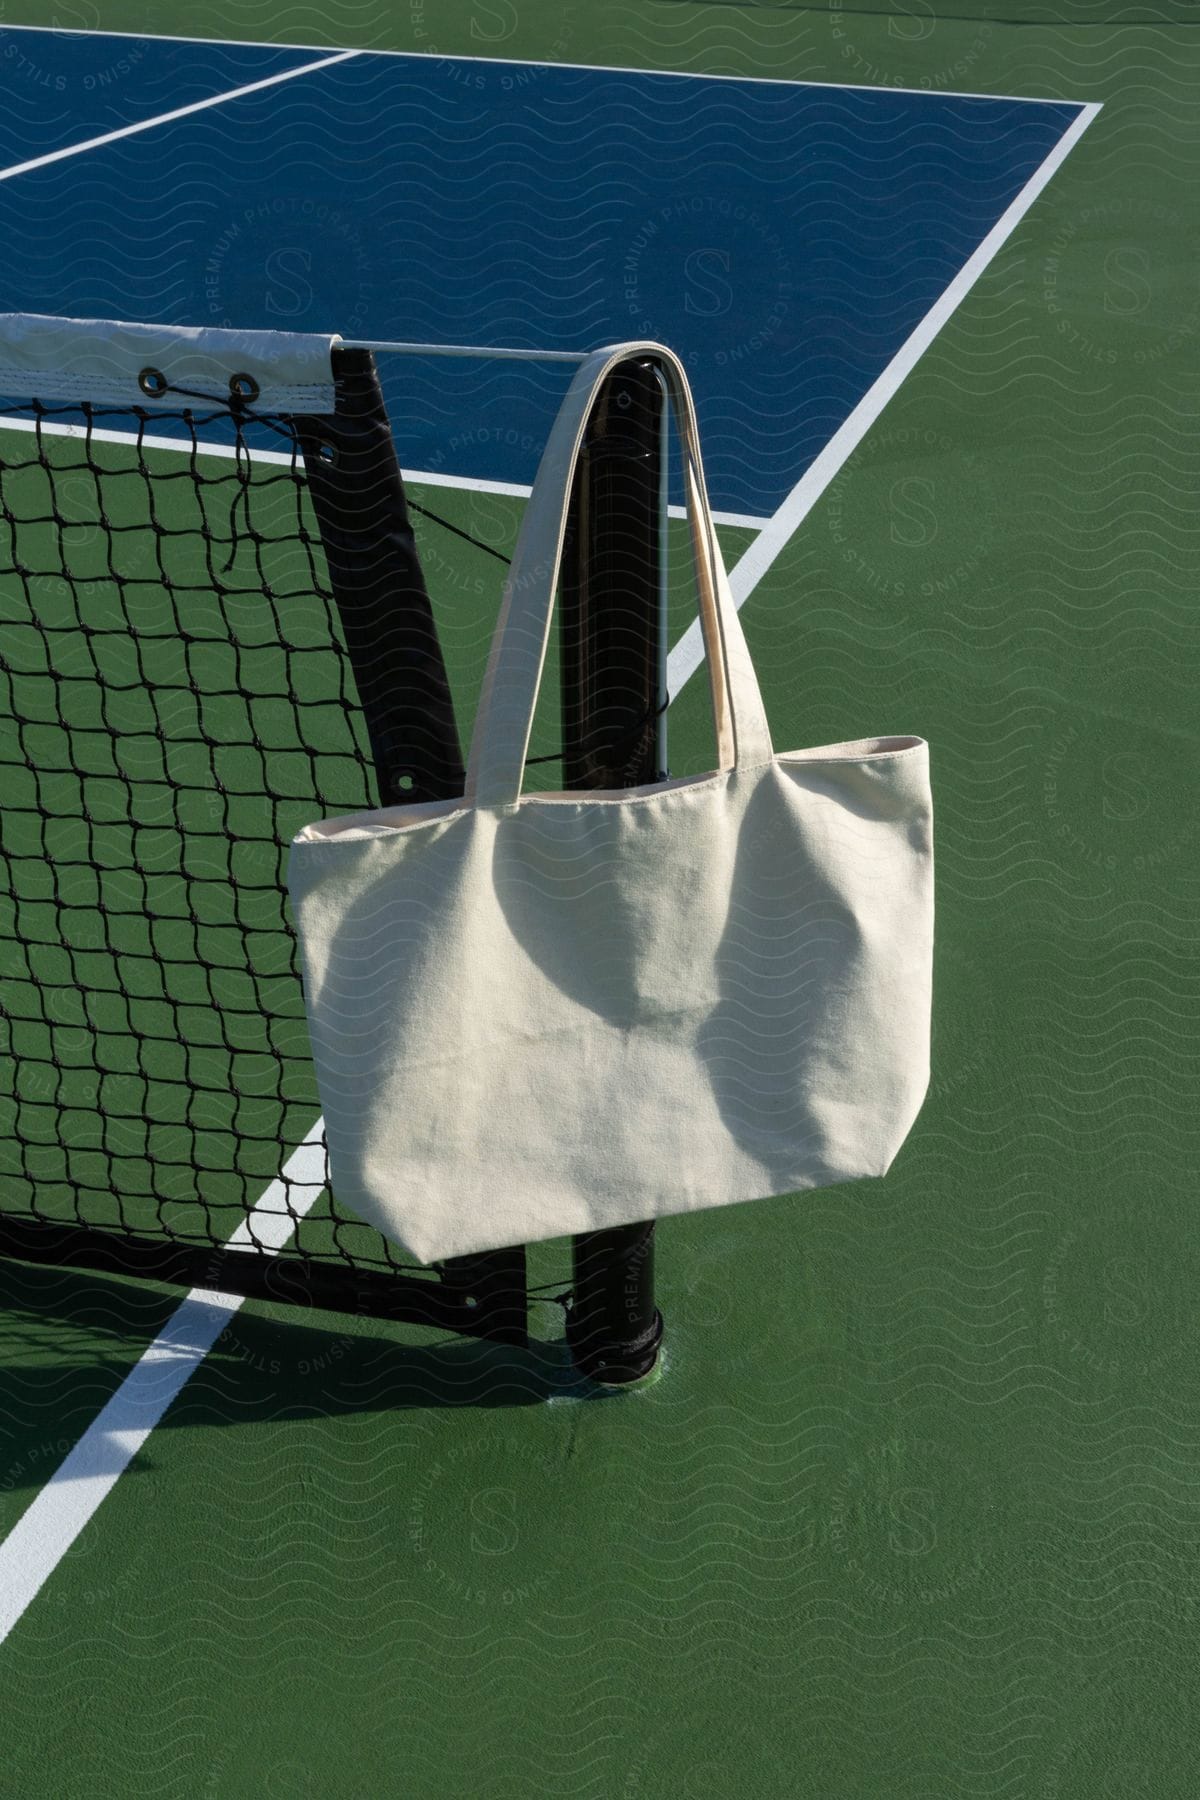 A canvas tote bag hangs on a black post on a tennis court.